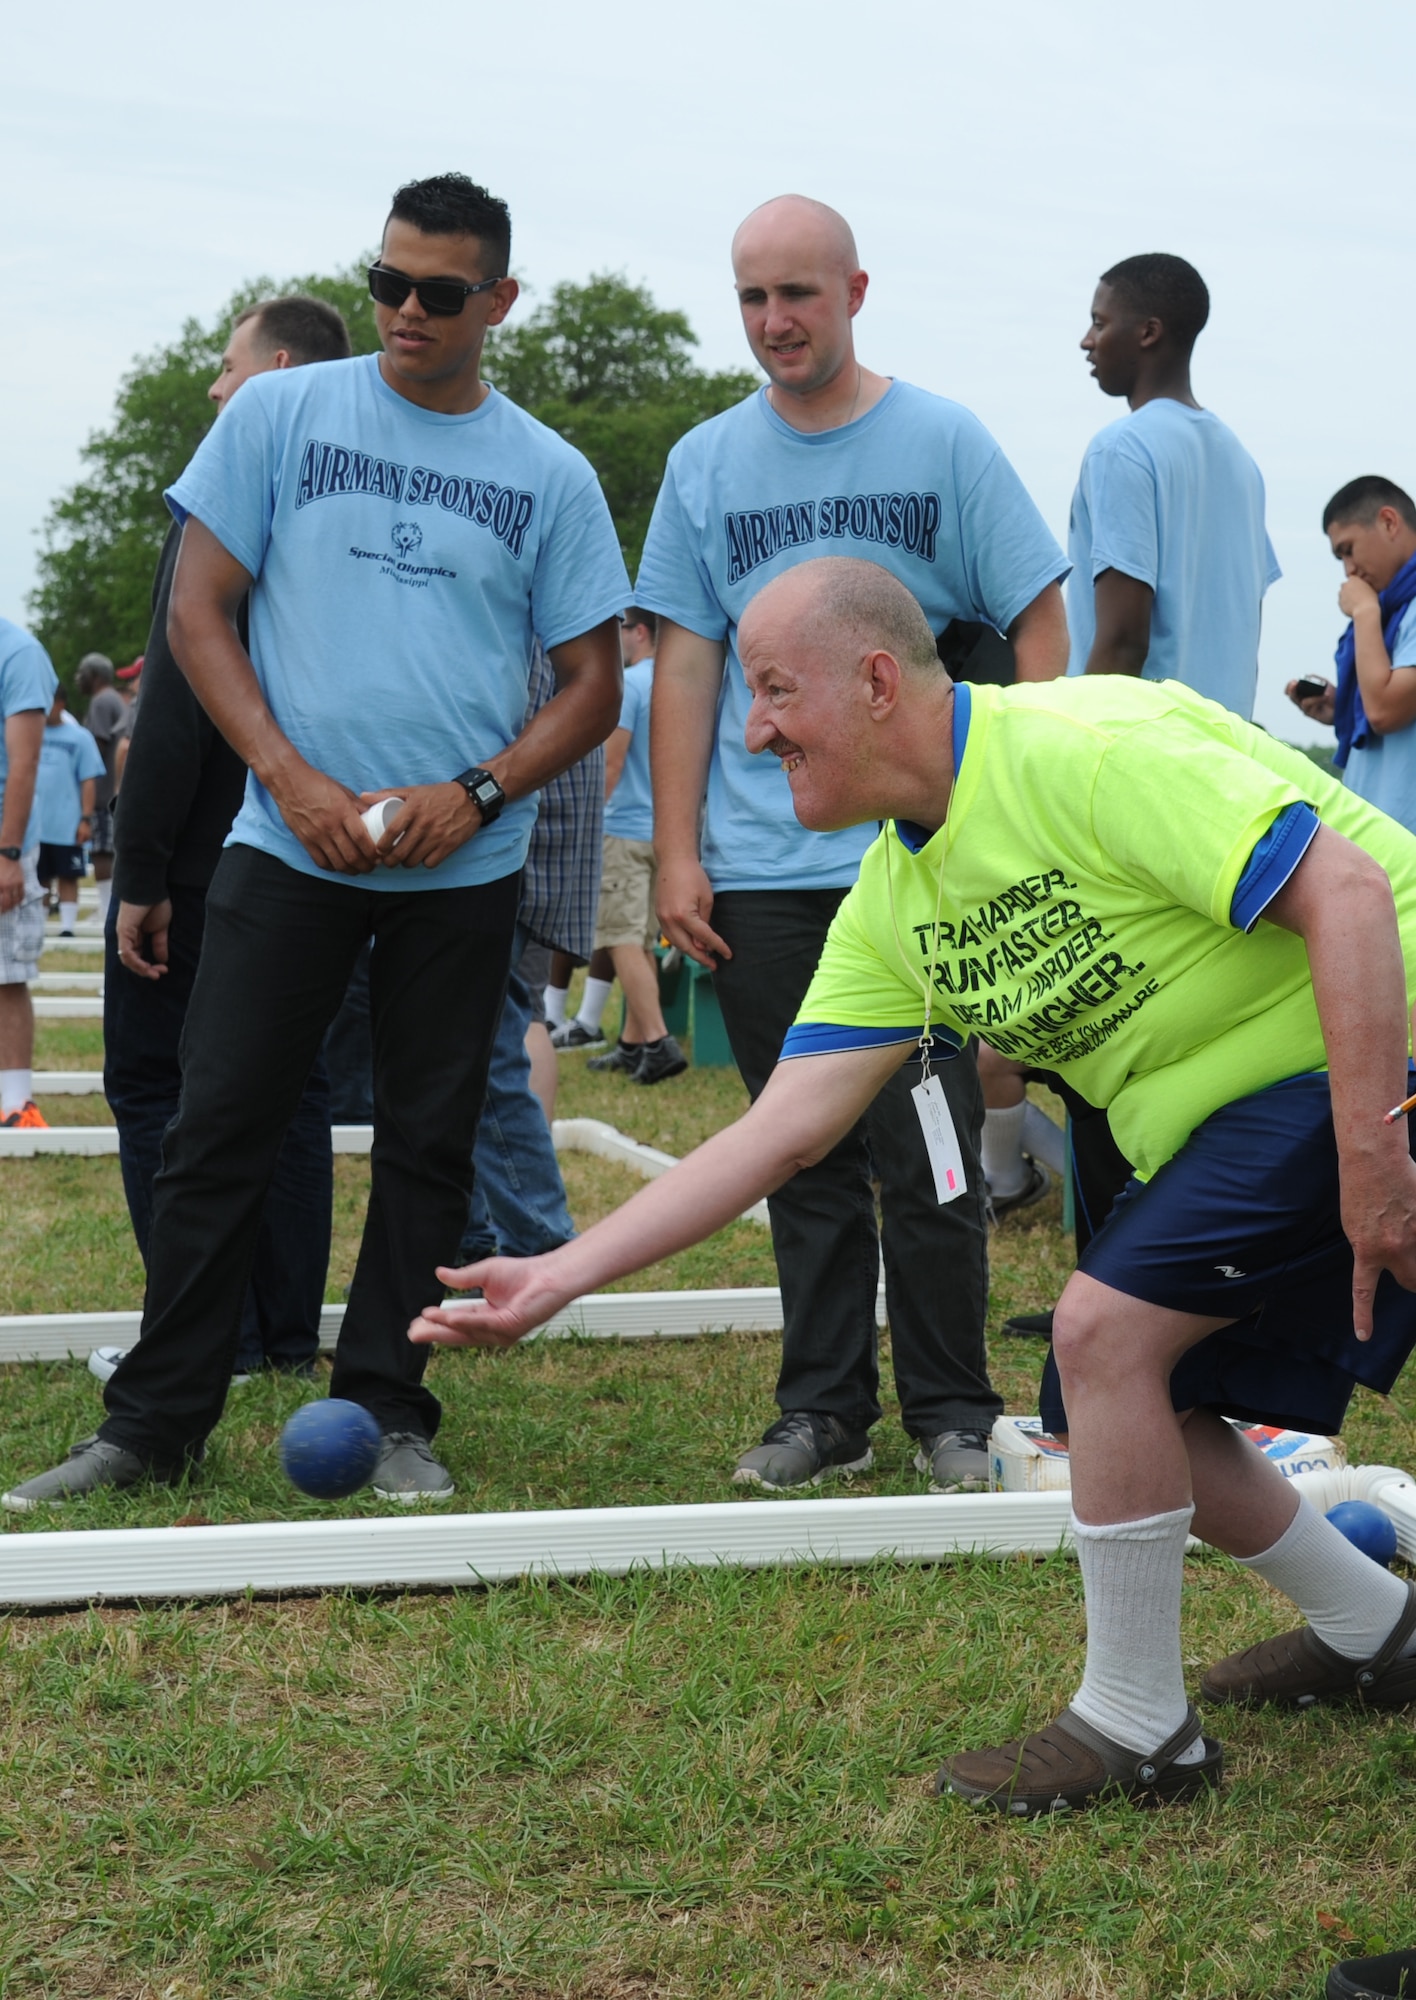 Marty Clark, athlete, tosses a bocce ball while being supported by his Airmen sponsors, Airman Roland Rios and Airman 1st Class Dane Sears, 335th Training Squadron, during the Special Olympics Mississippi Summer Games May 10, 2014, near  the triangle track, at Keesler Air Force Base, Miss.  More than 900 athletes and 3,000 volunteers worked together to hold competitions throughout the day.  This is the 28th year Keesler has hosted the state Special Olympics.  (U.S. Air Force photo by Kemberly Groue)